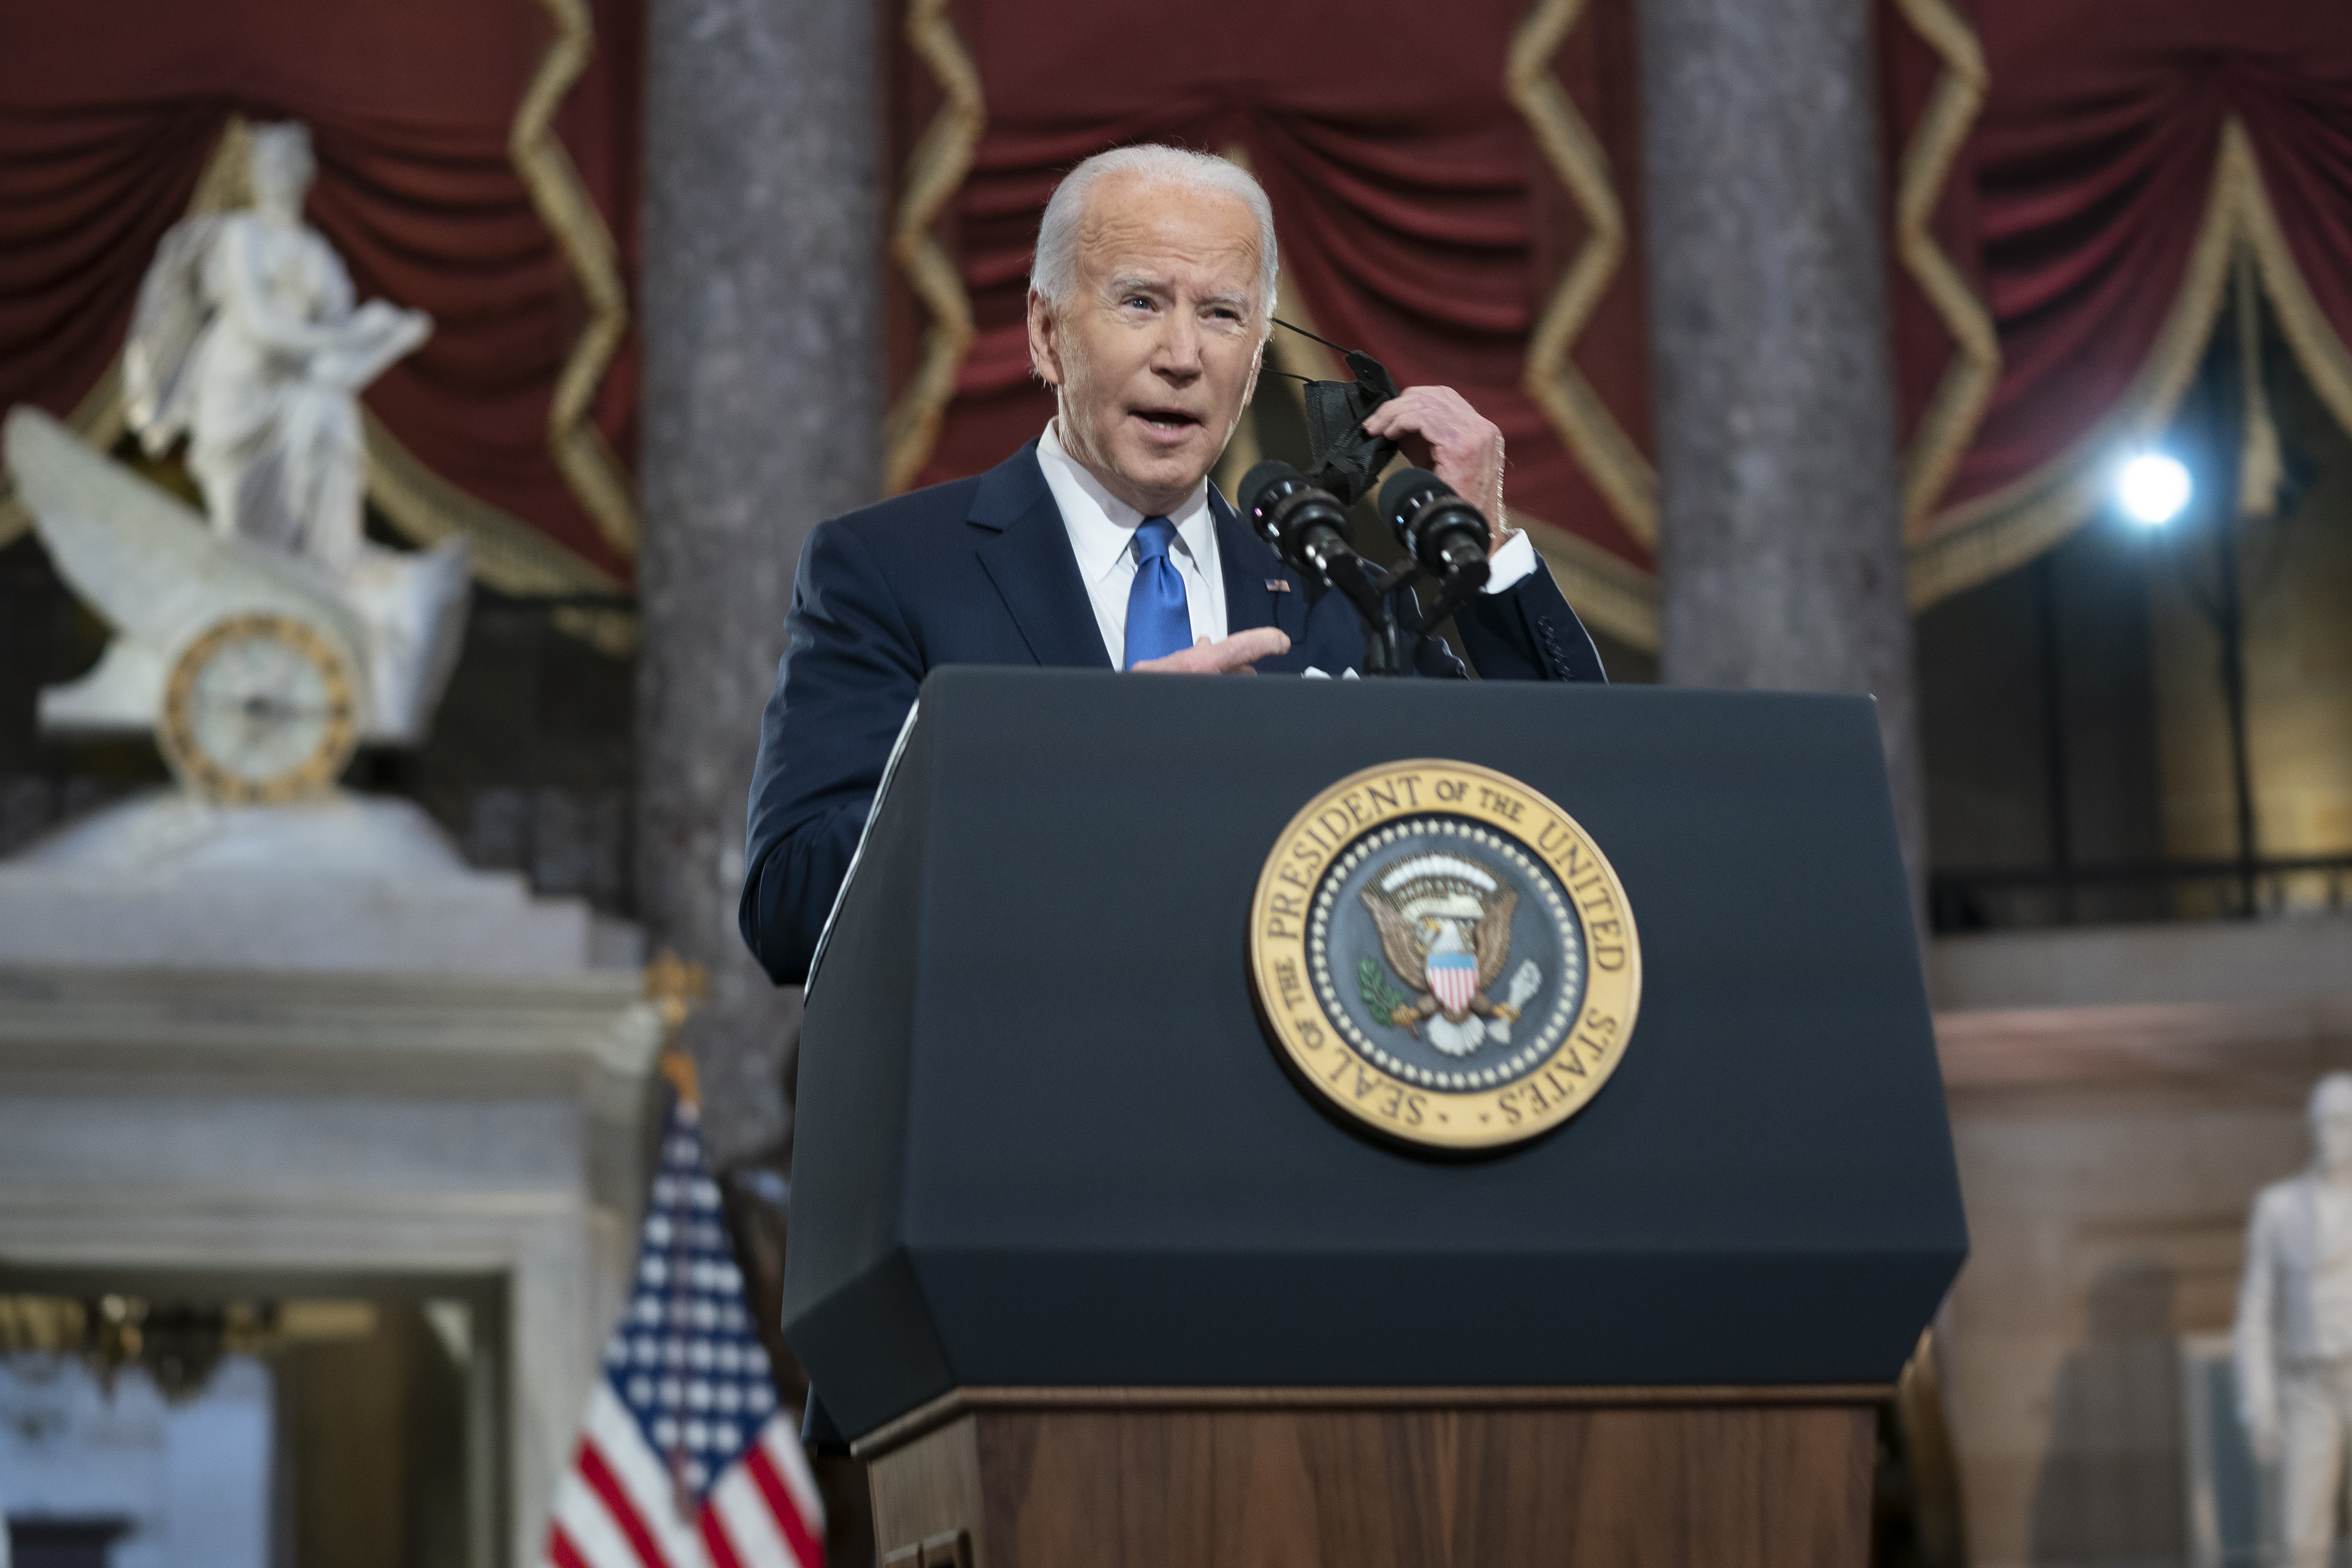 Biden marks year since Capitol attack: 'I will stand in this breach'